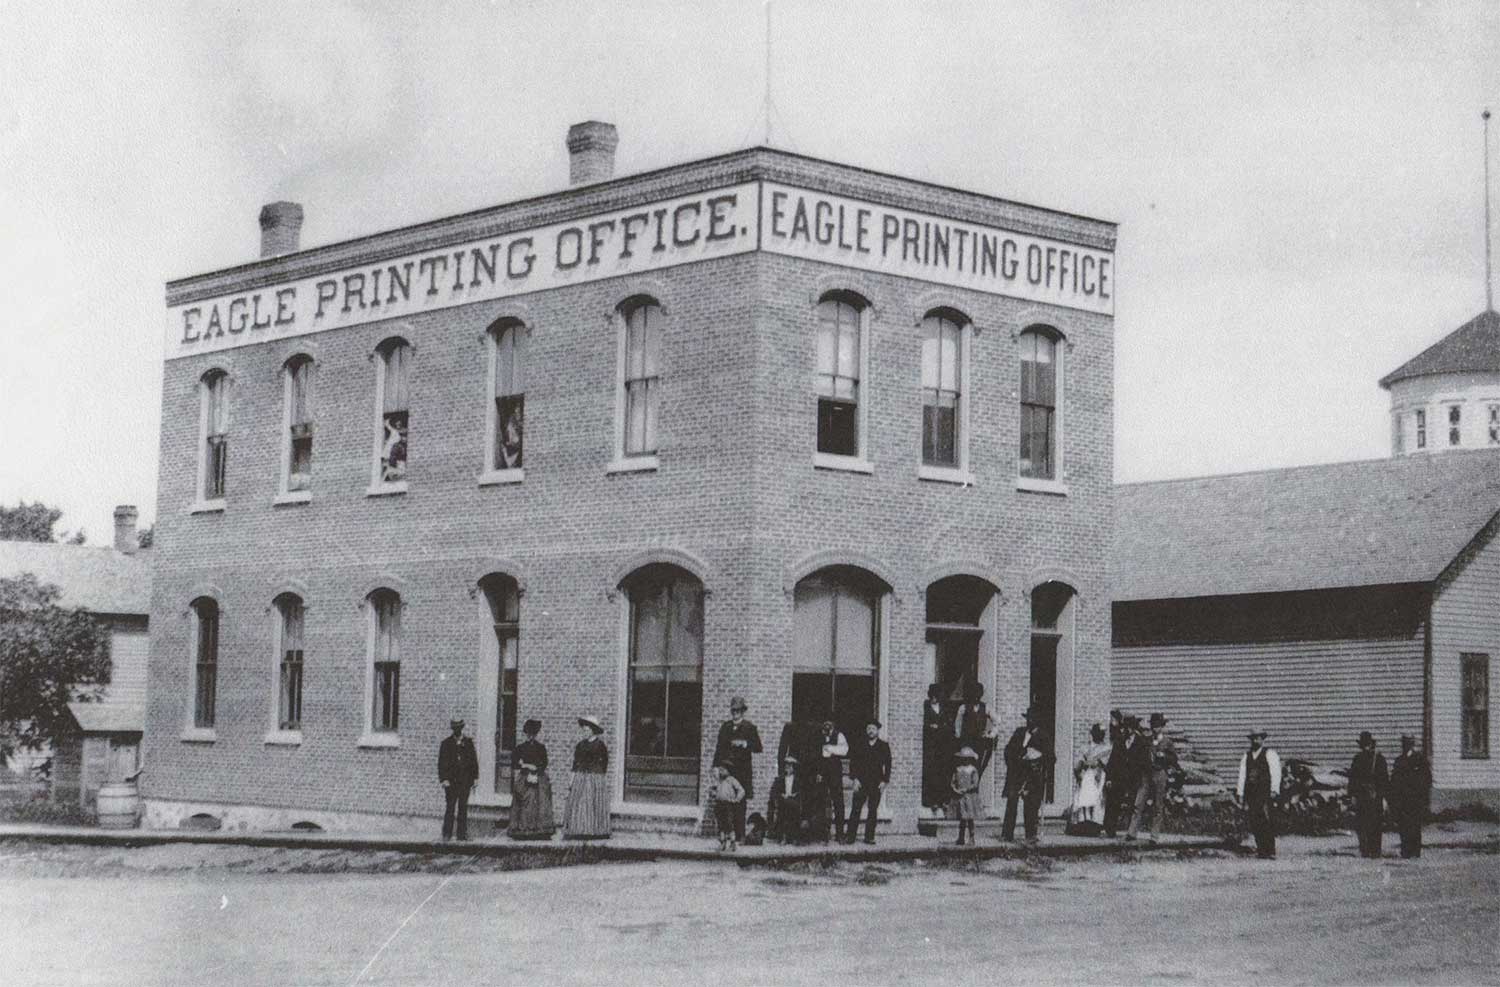 11. Eagle Printing Office